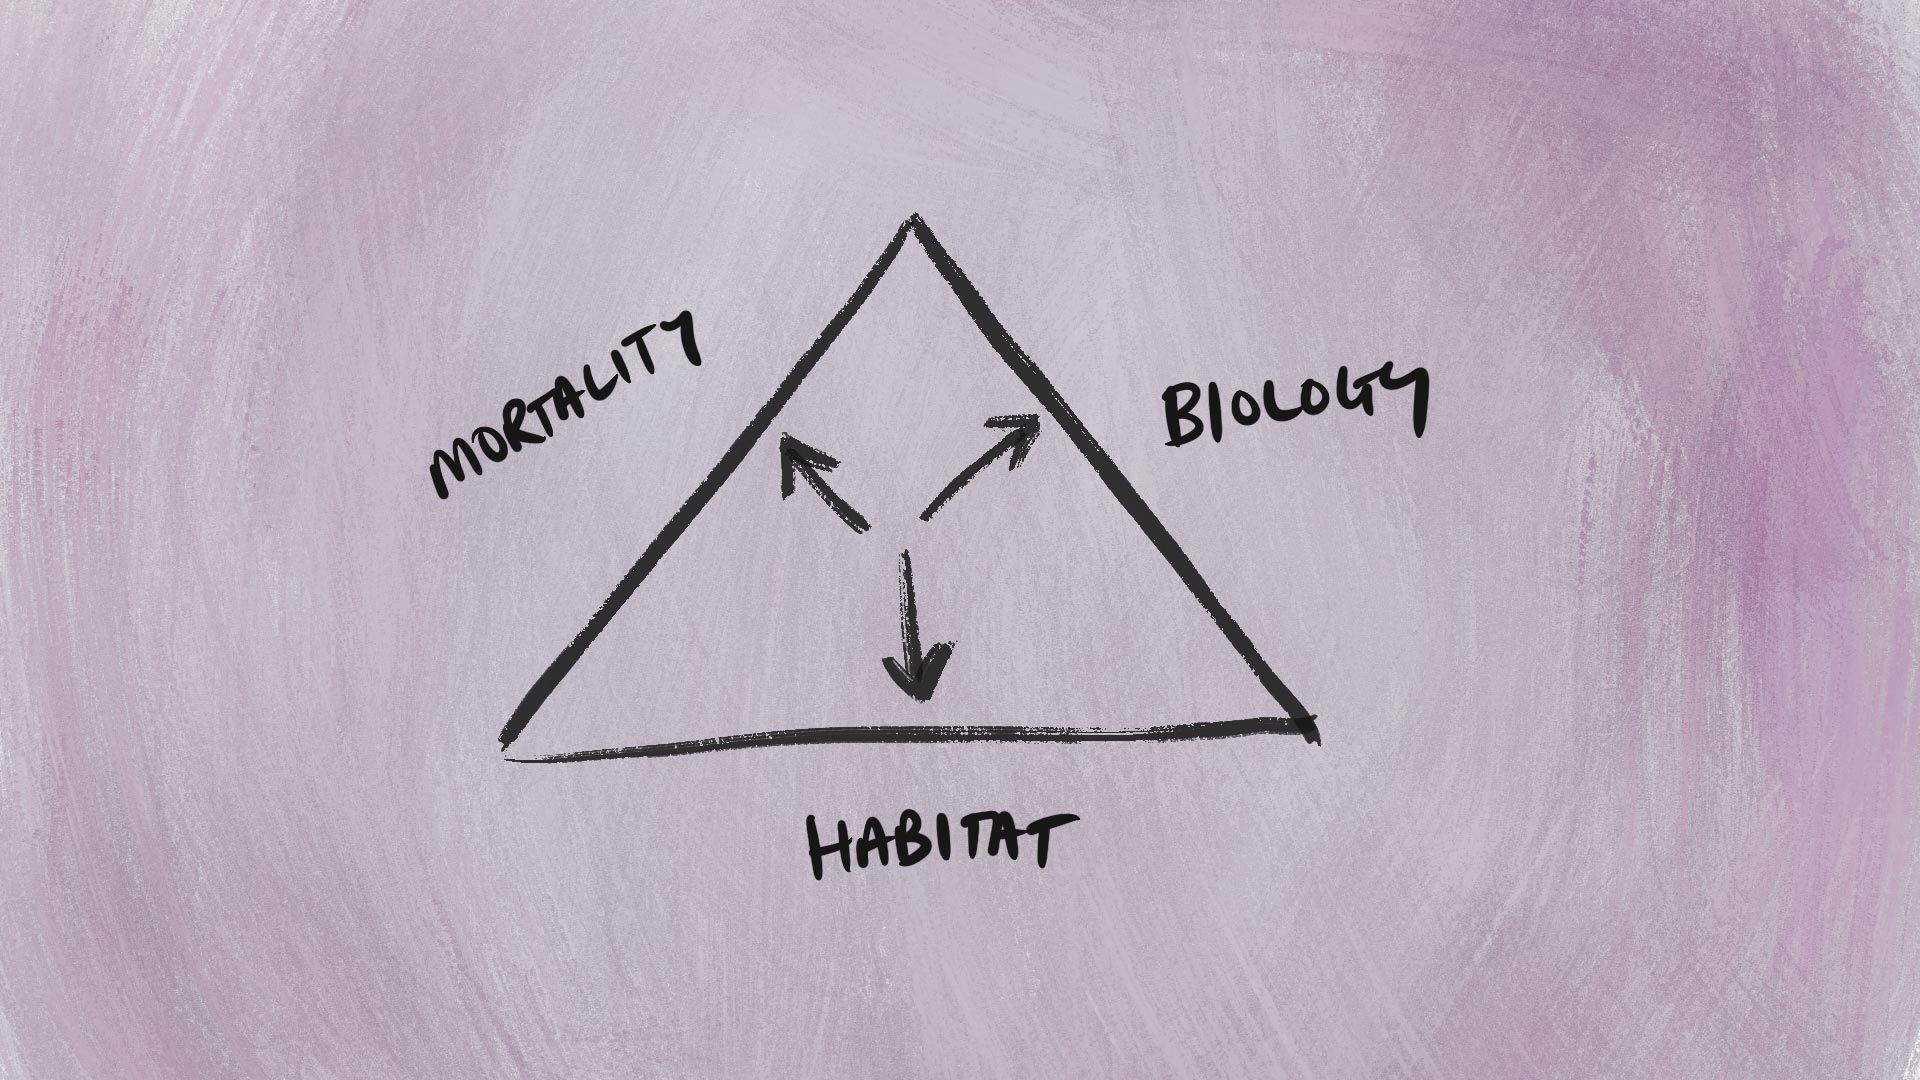 A triangle with each side labelled Habitat, Mortality, Biology with arrows pushing outwards